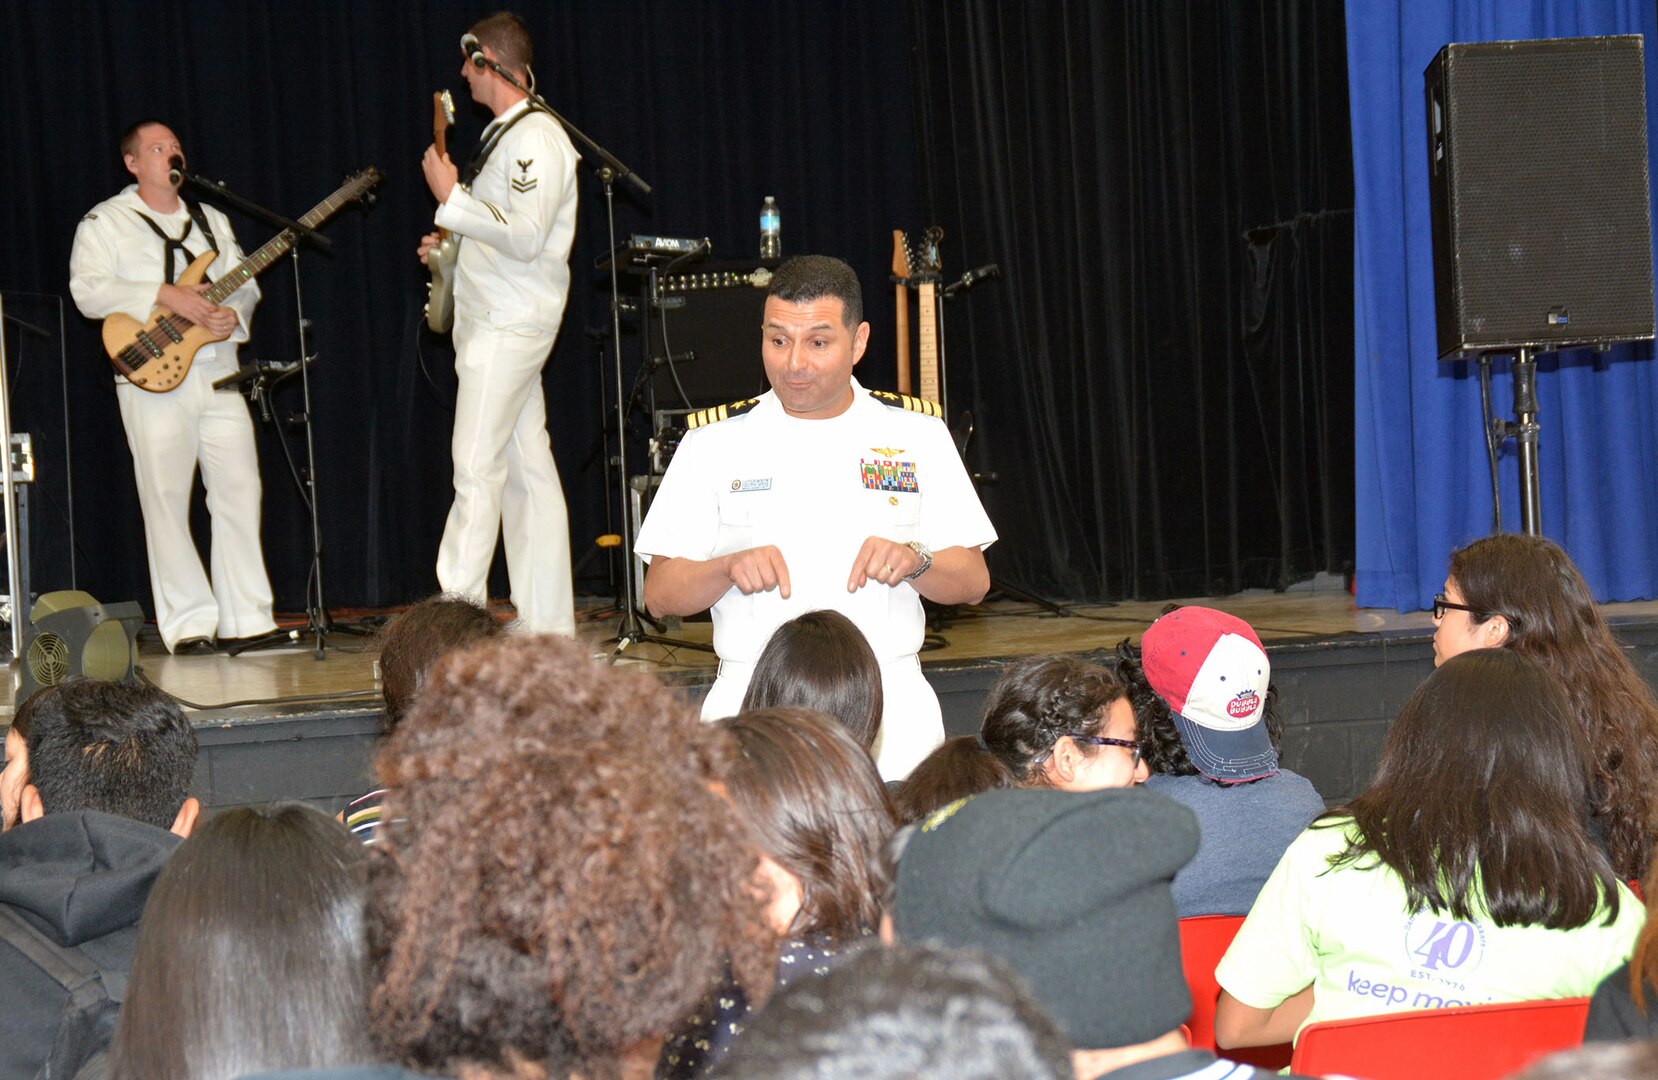 Navy Capt. Edgardo Moreno, executive officer of the USS San Antonio (LPD-17), addresses students at Memorial High School prior to a performance from the “Destroyers,” the popular music group of Navy Band Southwest from San Diego.  Crew members of the USS San Antonio, along with Sailors from Navy Recruiting District San Antonio, visited the school to conduct community outreach and spread Navy Awareness as part of Fiesta festivities.